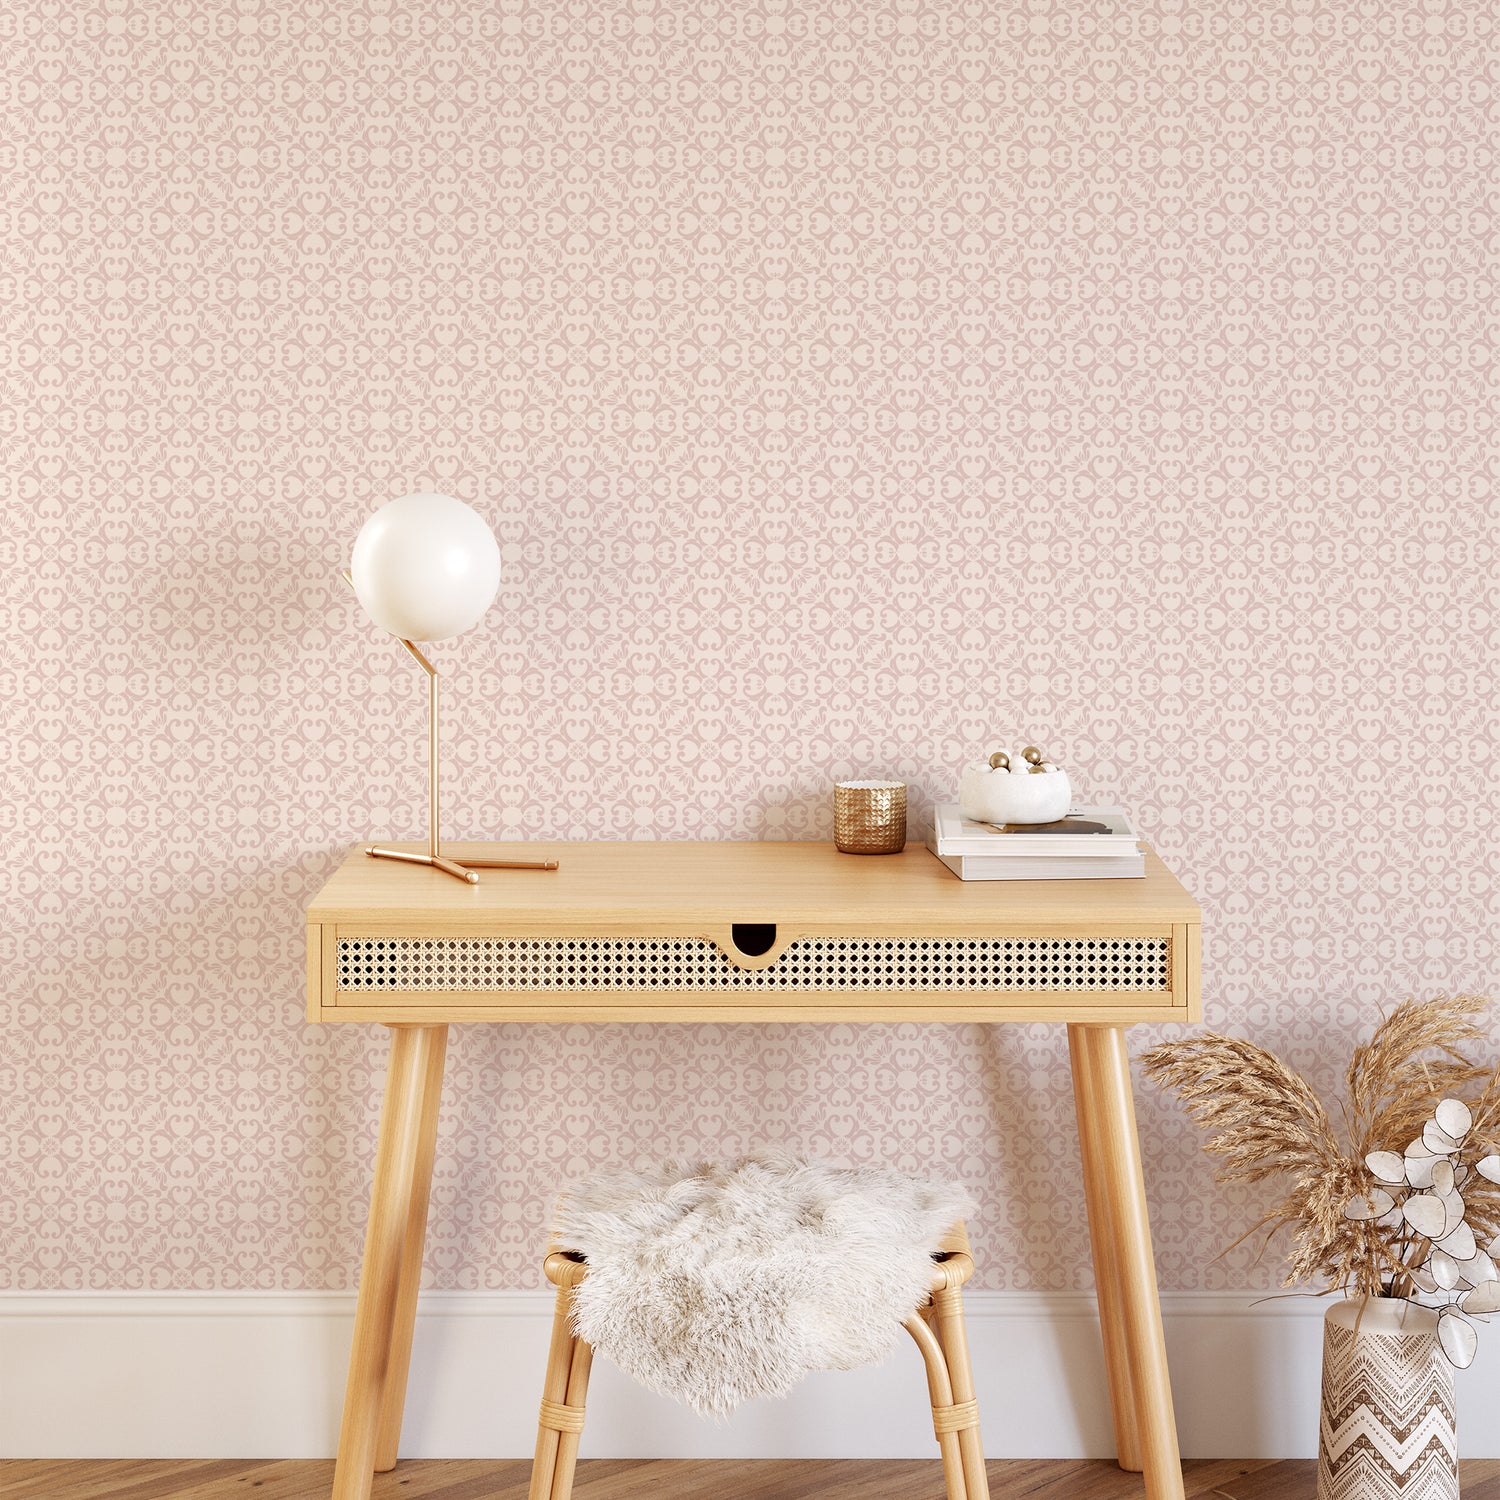 Ayara's peel and stick removable Spanish Tiles Wallpaper in Blush featured in an office.